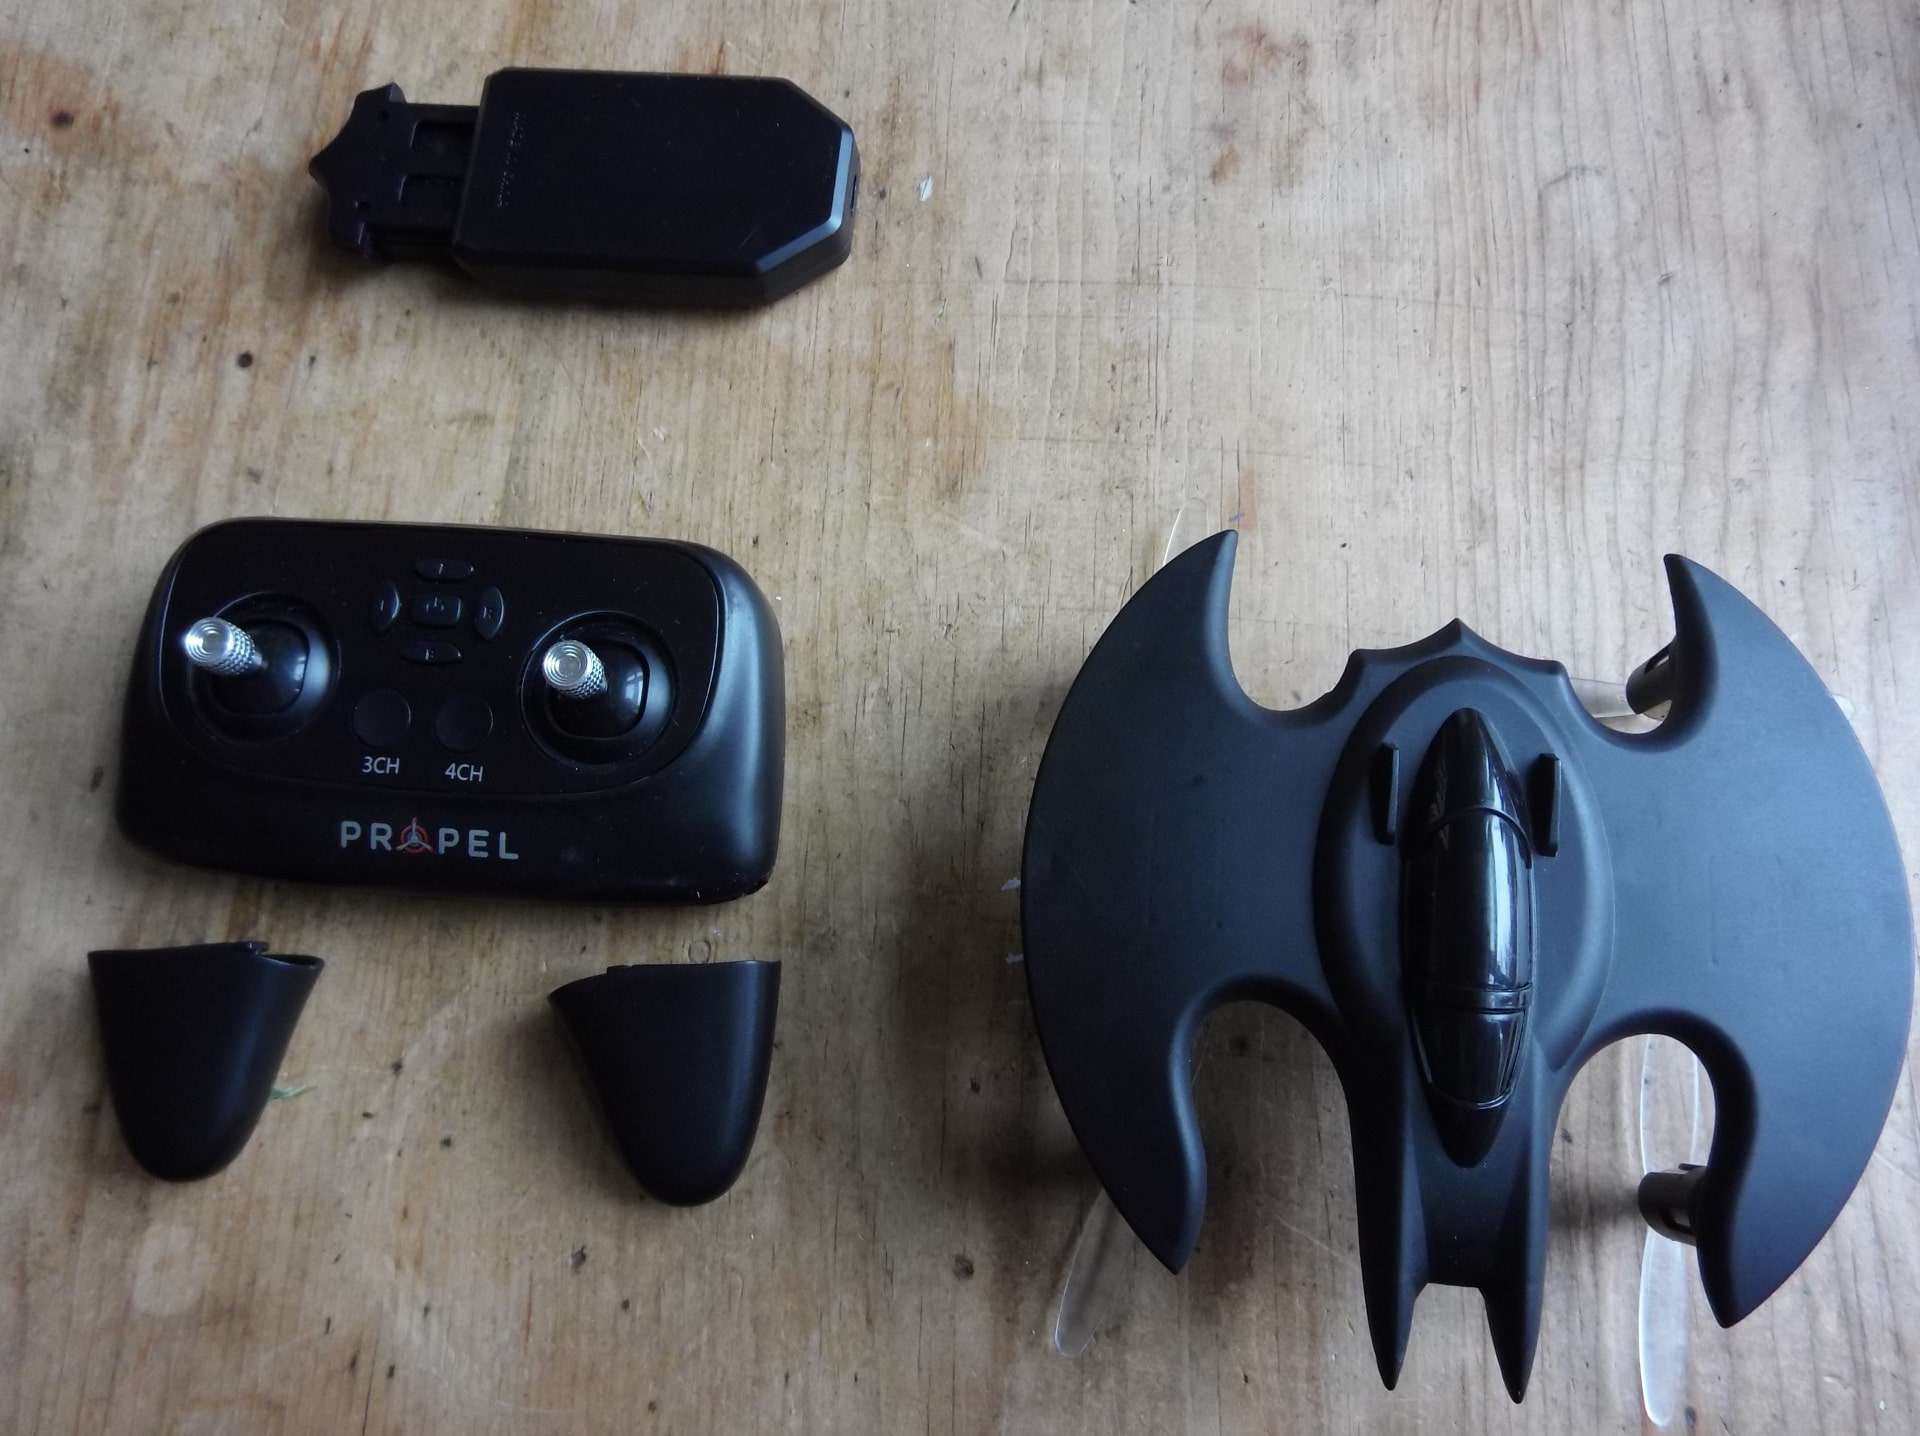 Batwing HD review: A fun £80 drone with a novel design